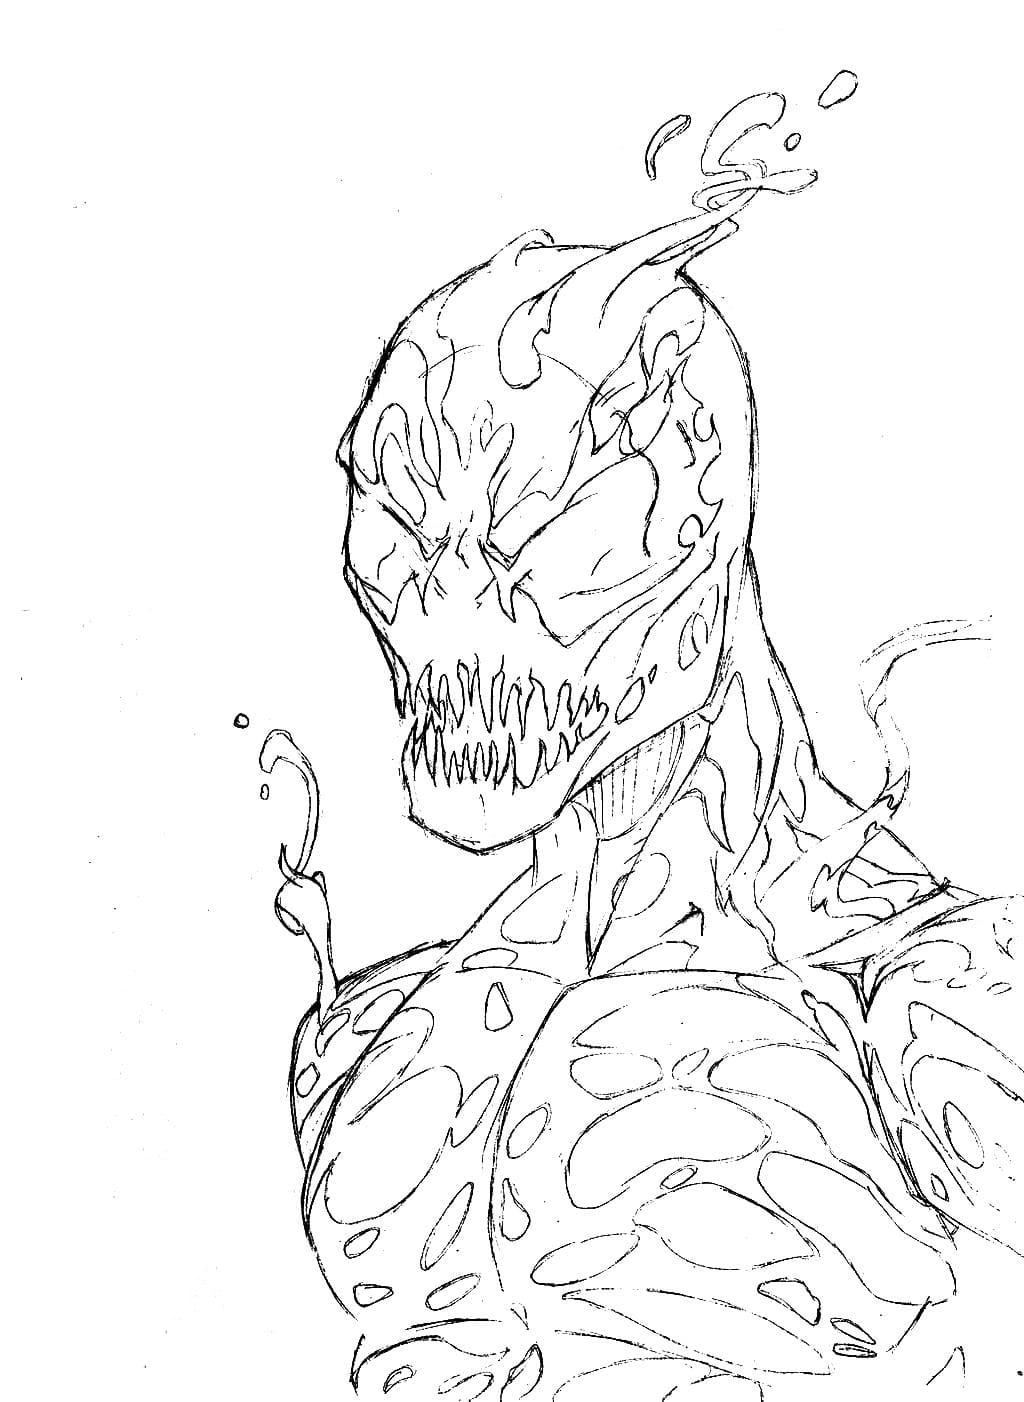 39+ Venom Let There Be Carnage Coloring Pages - SonasHarlee